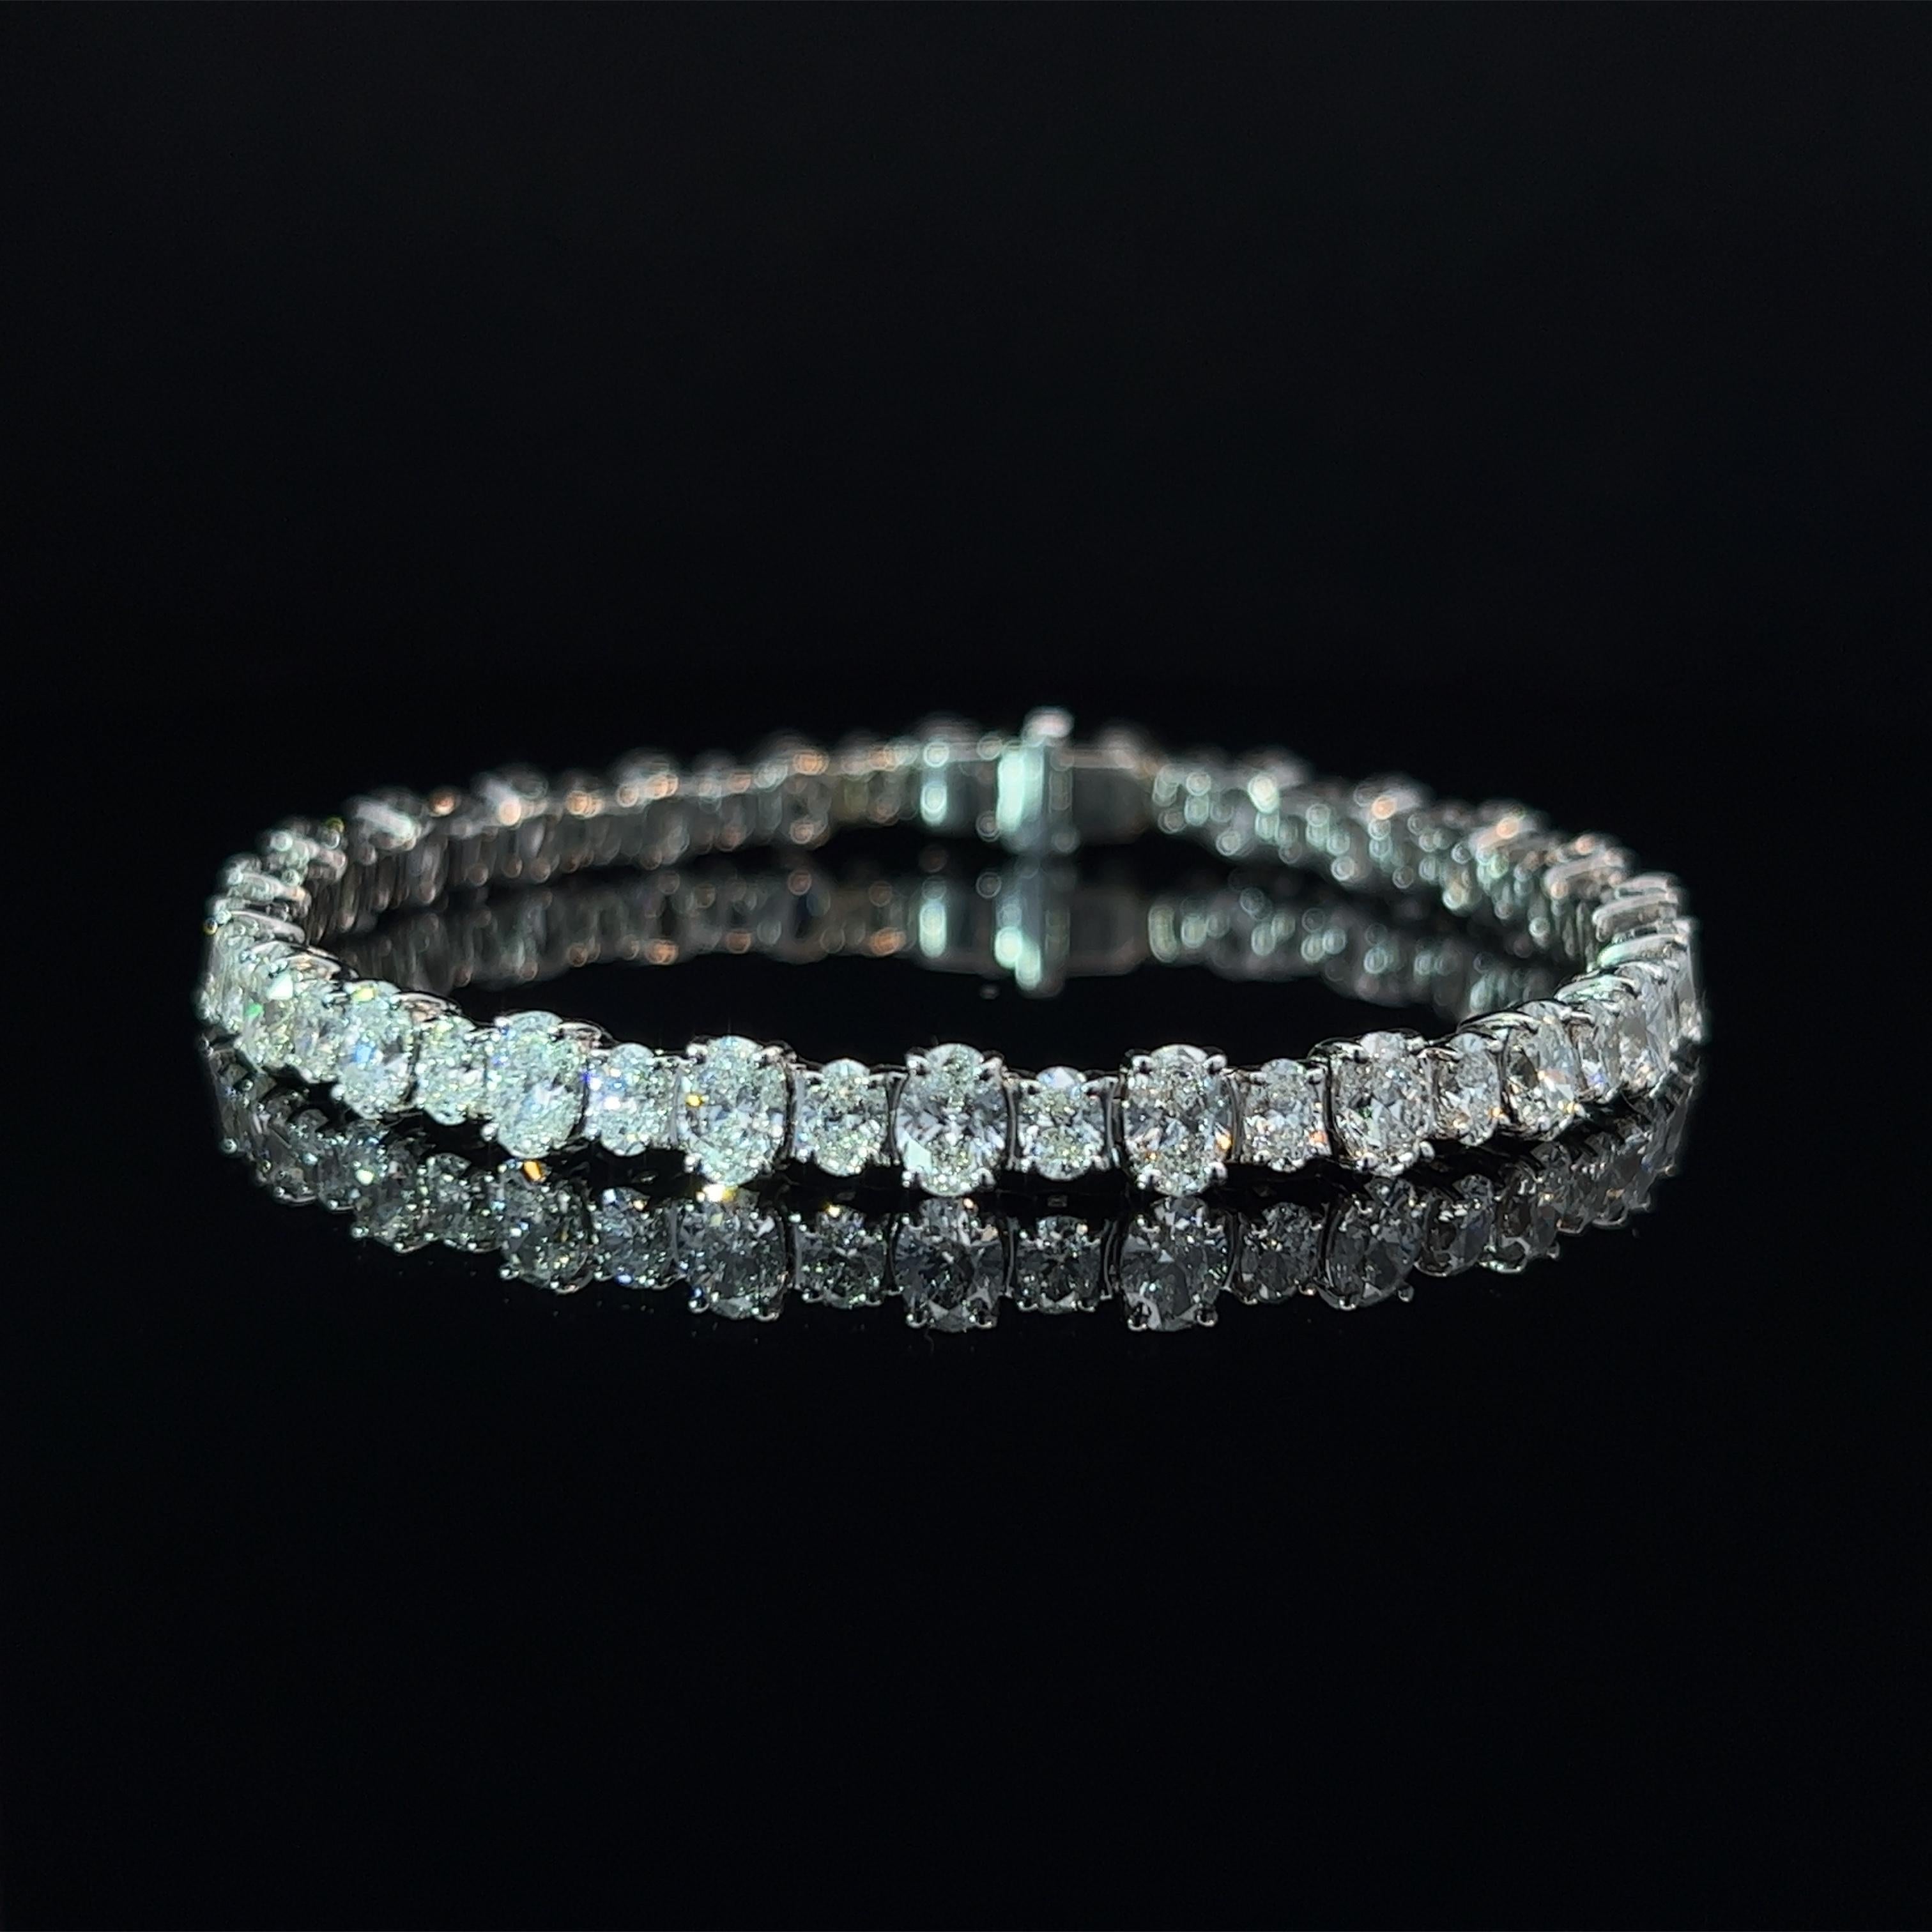 Diamond Shape: Oval Cut 
Total Diamond Weight: 10.51ct
Individual Diamond Weight: .33ct & .15ct
Color/Clarity: FG VVS  
Metal: 18K White Gold  
Metal Weight: 15.33g 

Key Features:

Oval-Cut Diamonds: The centerpiece of this bracelet showcases a